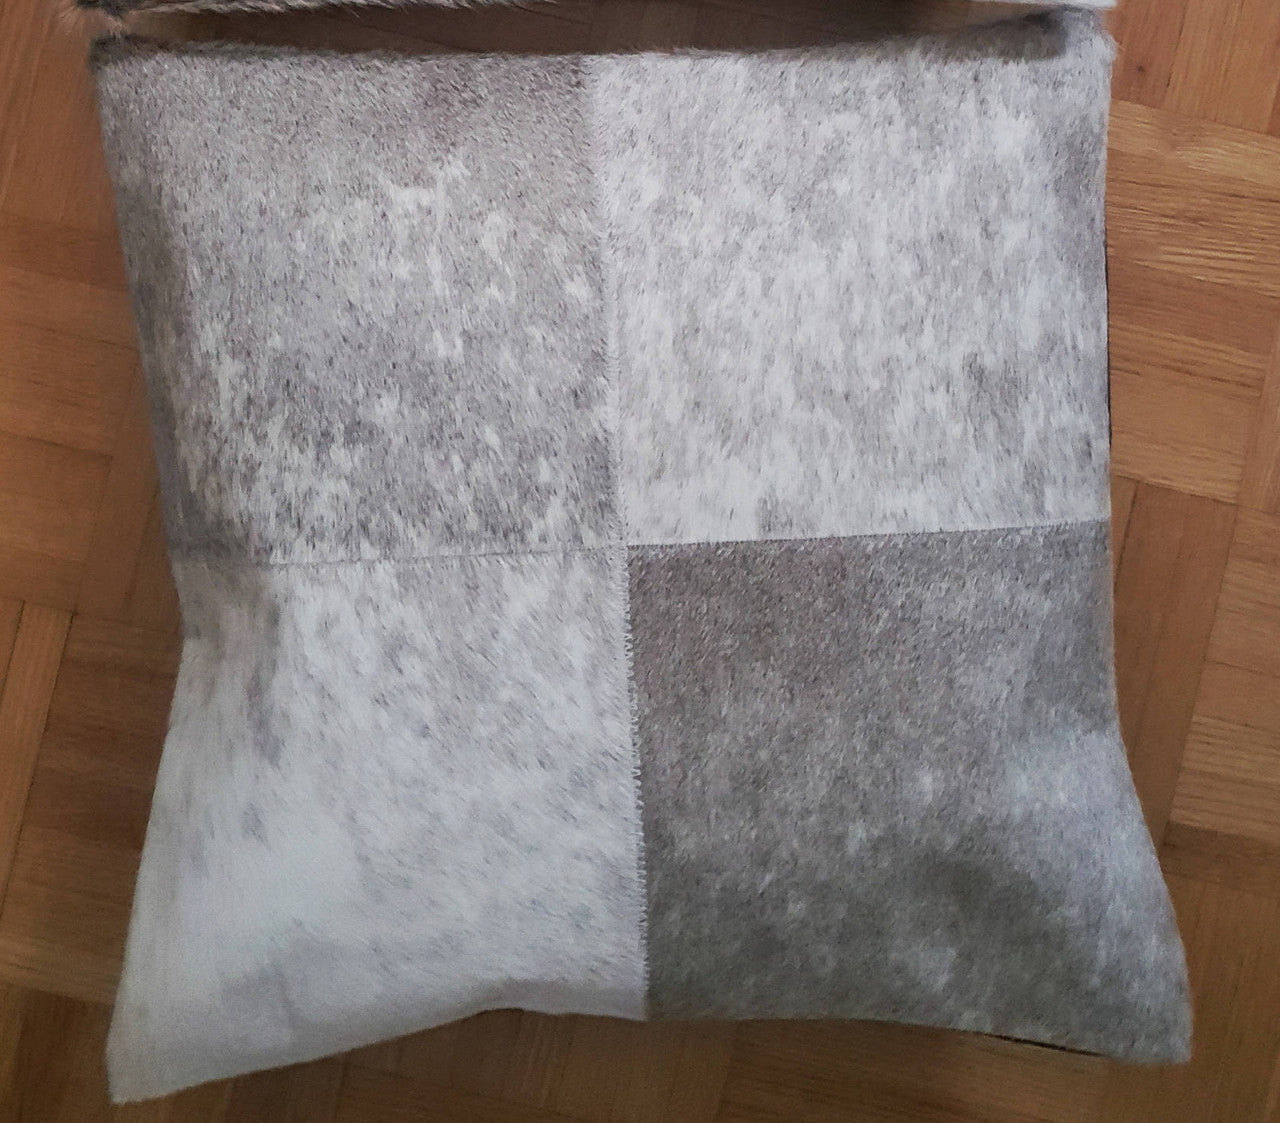 Cowhide Pillow Cover Grey White Cow Hide Patchwork Cushions 16 by 16 inches Two Covers